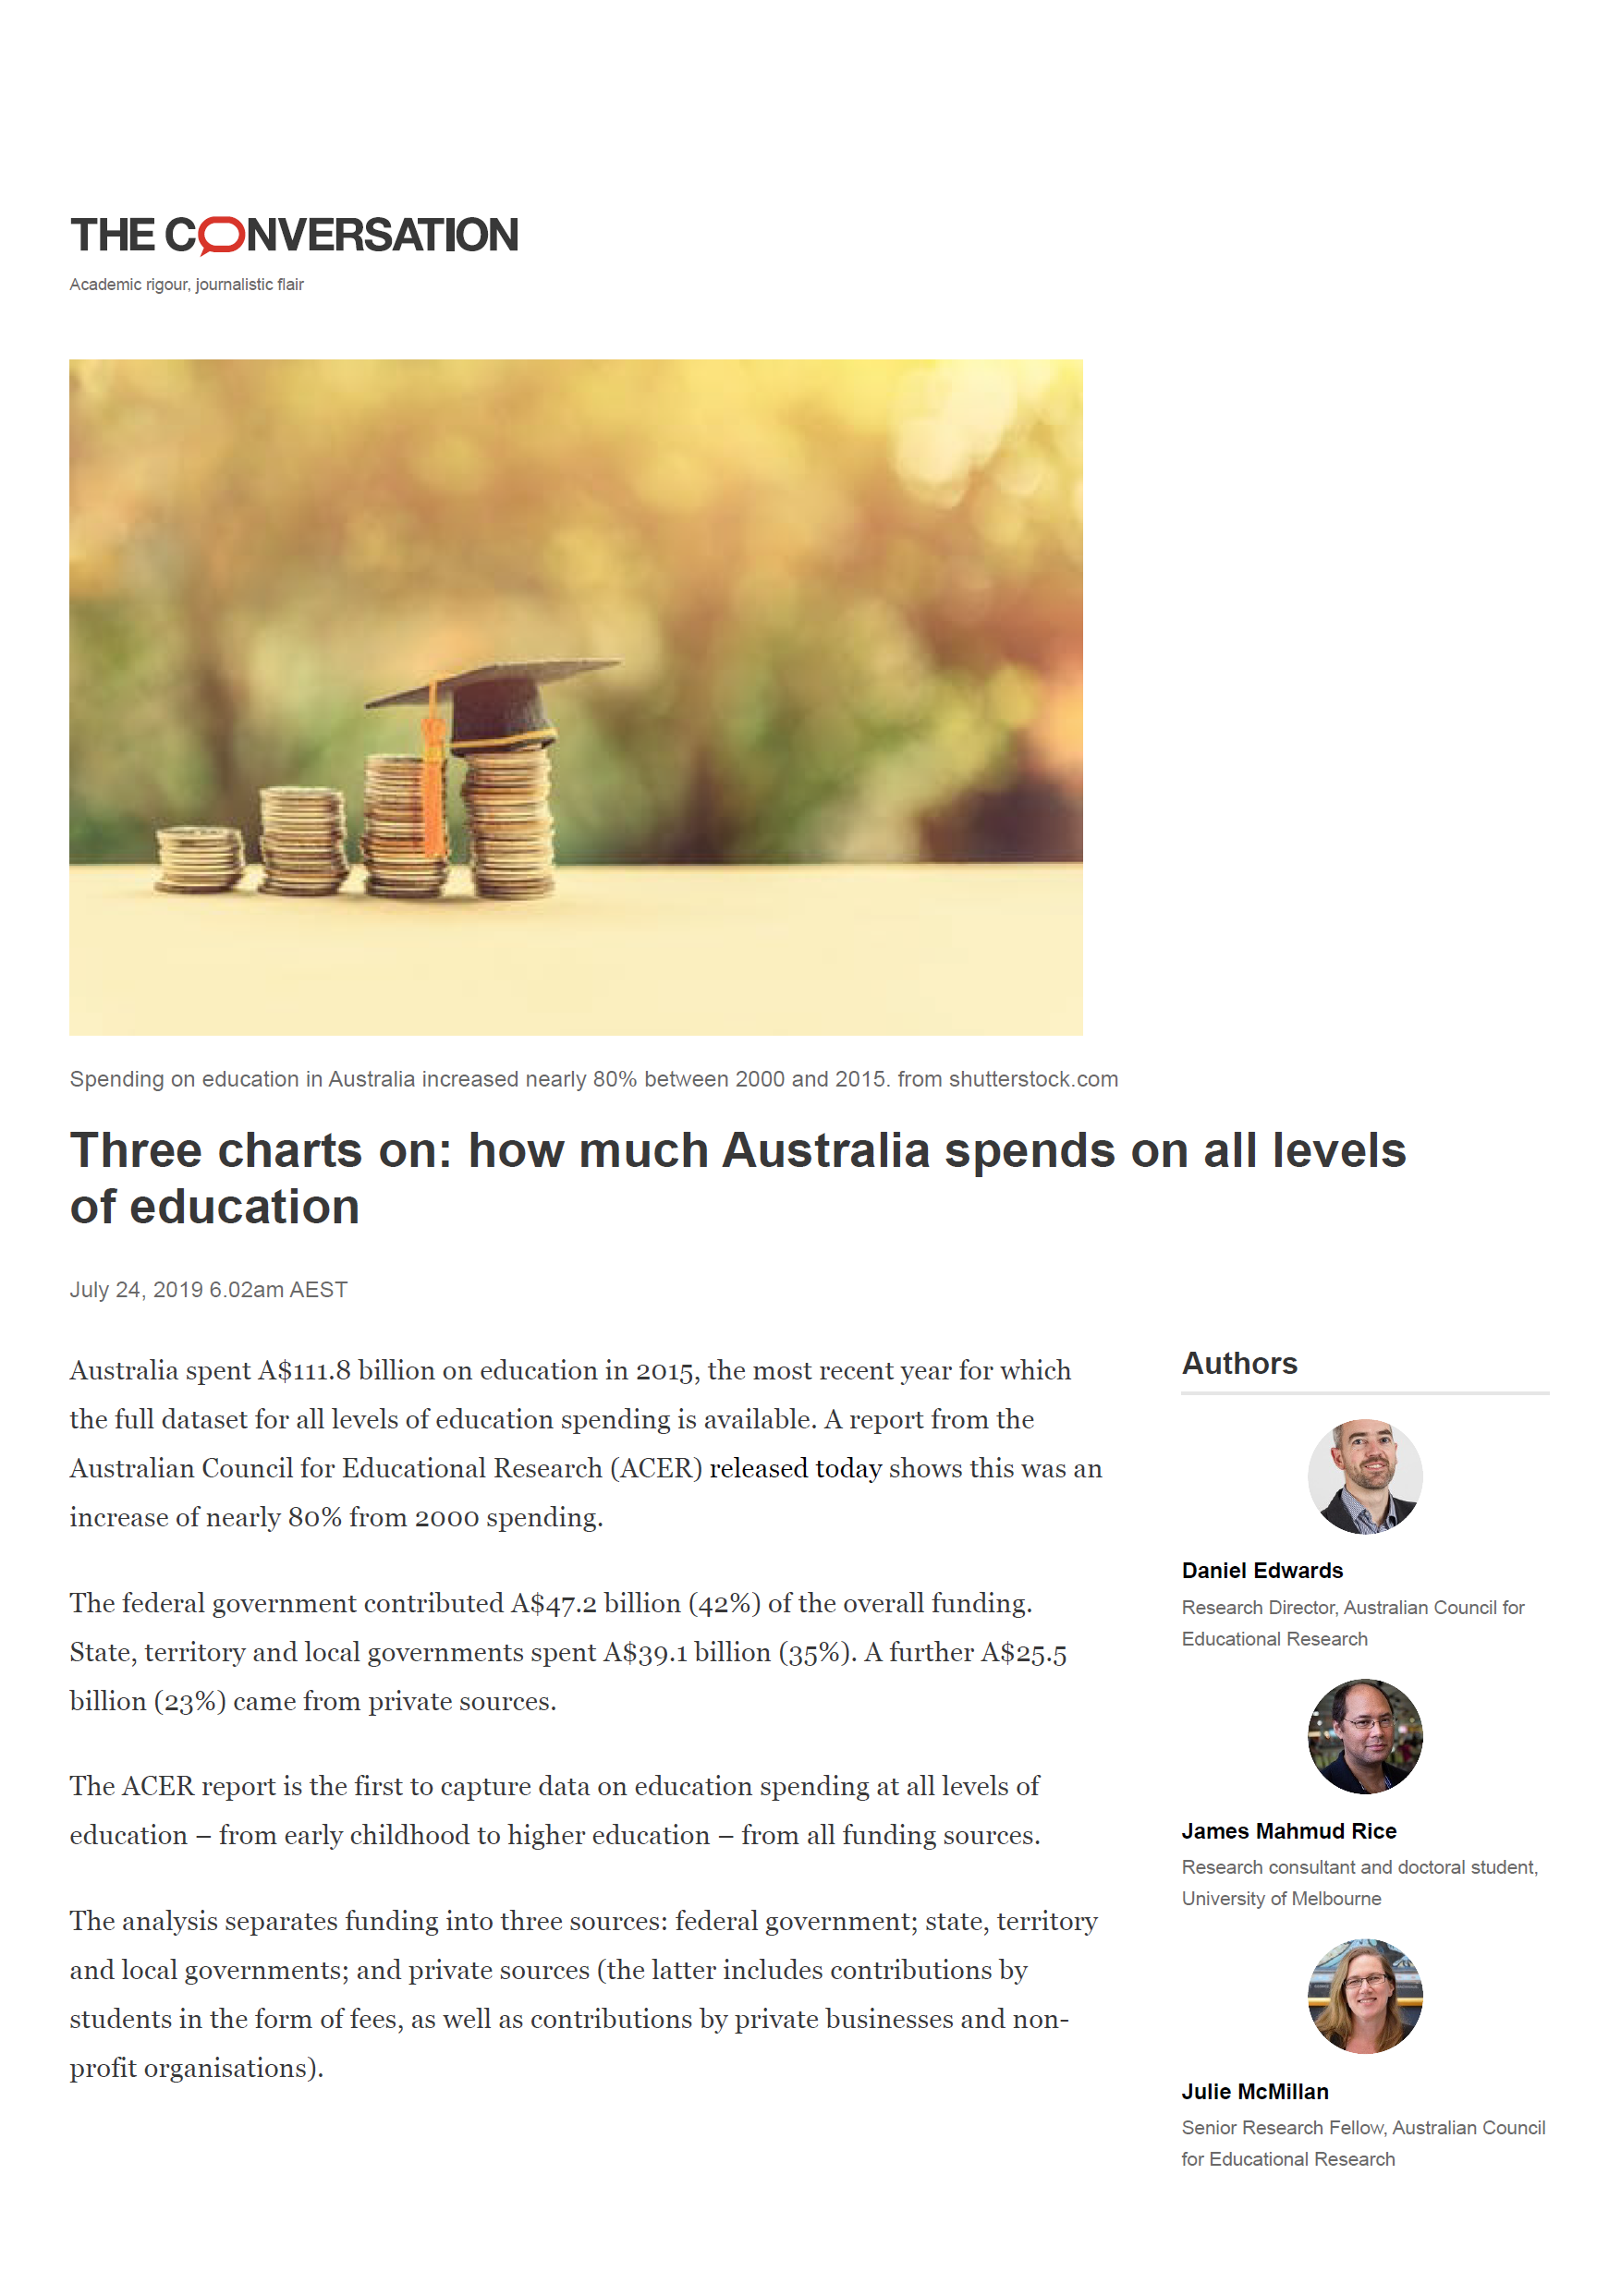 [Three Charts On: How Much Australia Spends On All Levels Of Education]